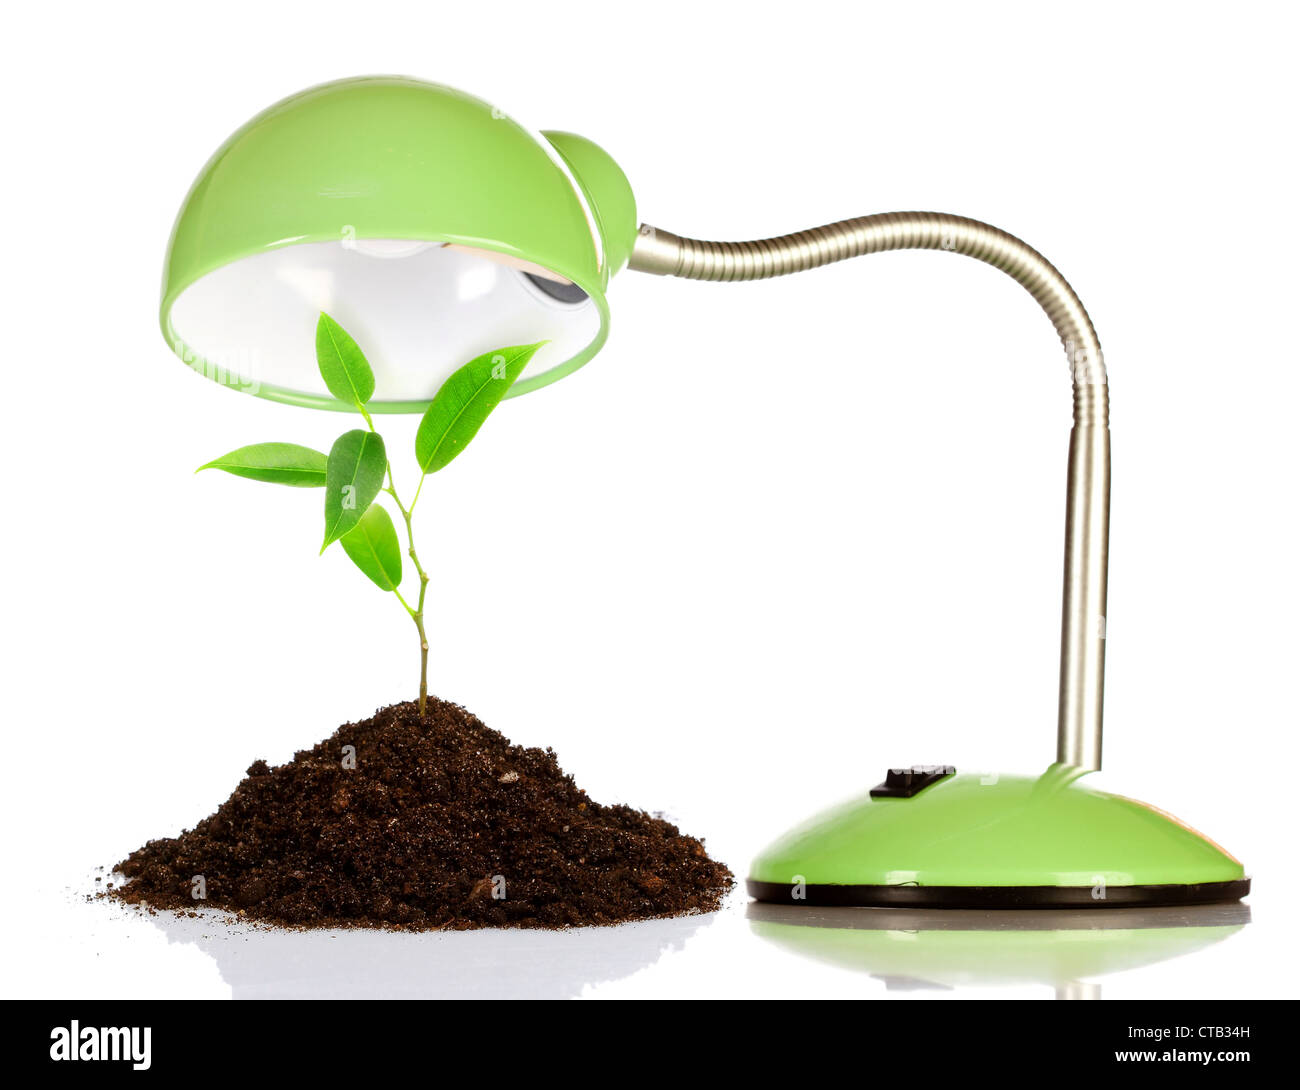 Young sprout and table lamp on a white background ... Stock Photo